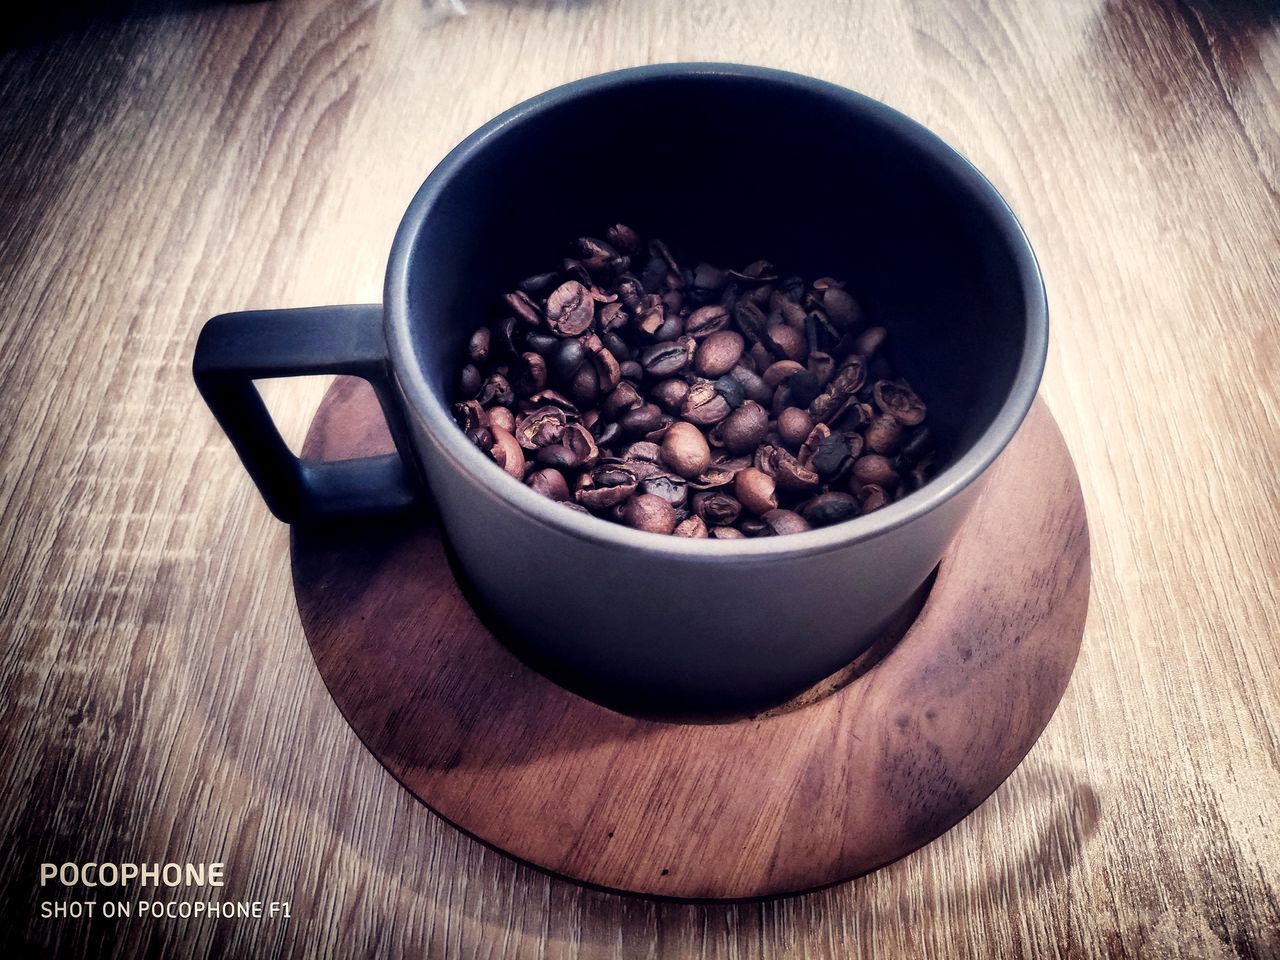 food and drink, freshness, table, food, indoors, still life, wood - material, cup, no people, close-up, coffee, healthy eating, wellbeing, bowl, refreshment, mug, drink, coffee - drink, high angle view, brown, caffeine, wood grain